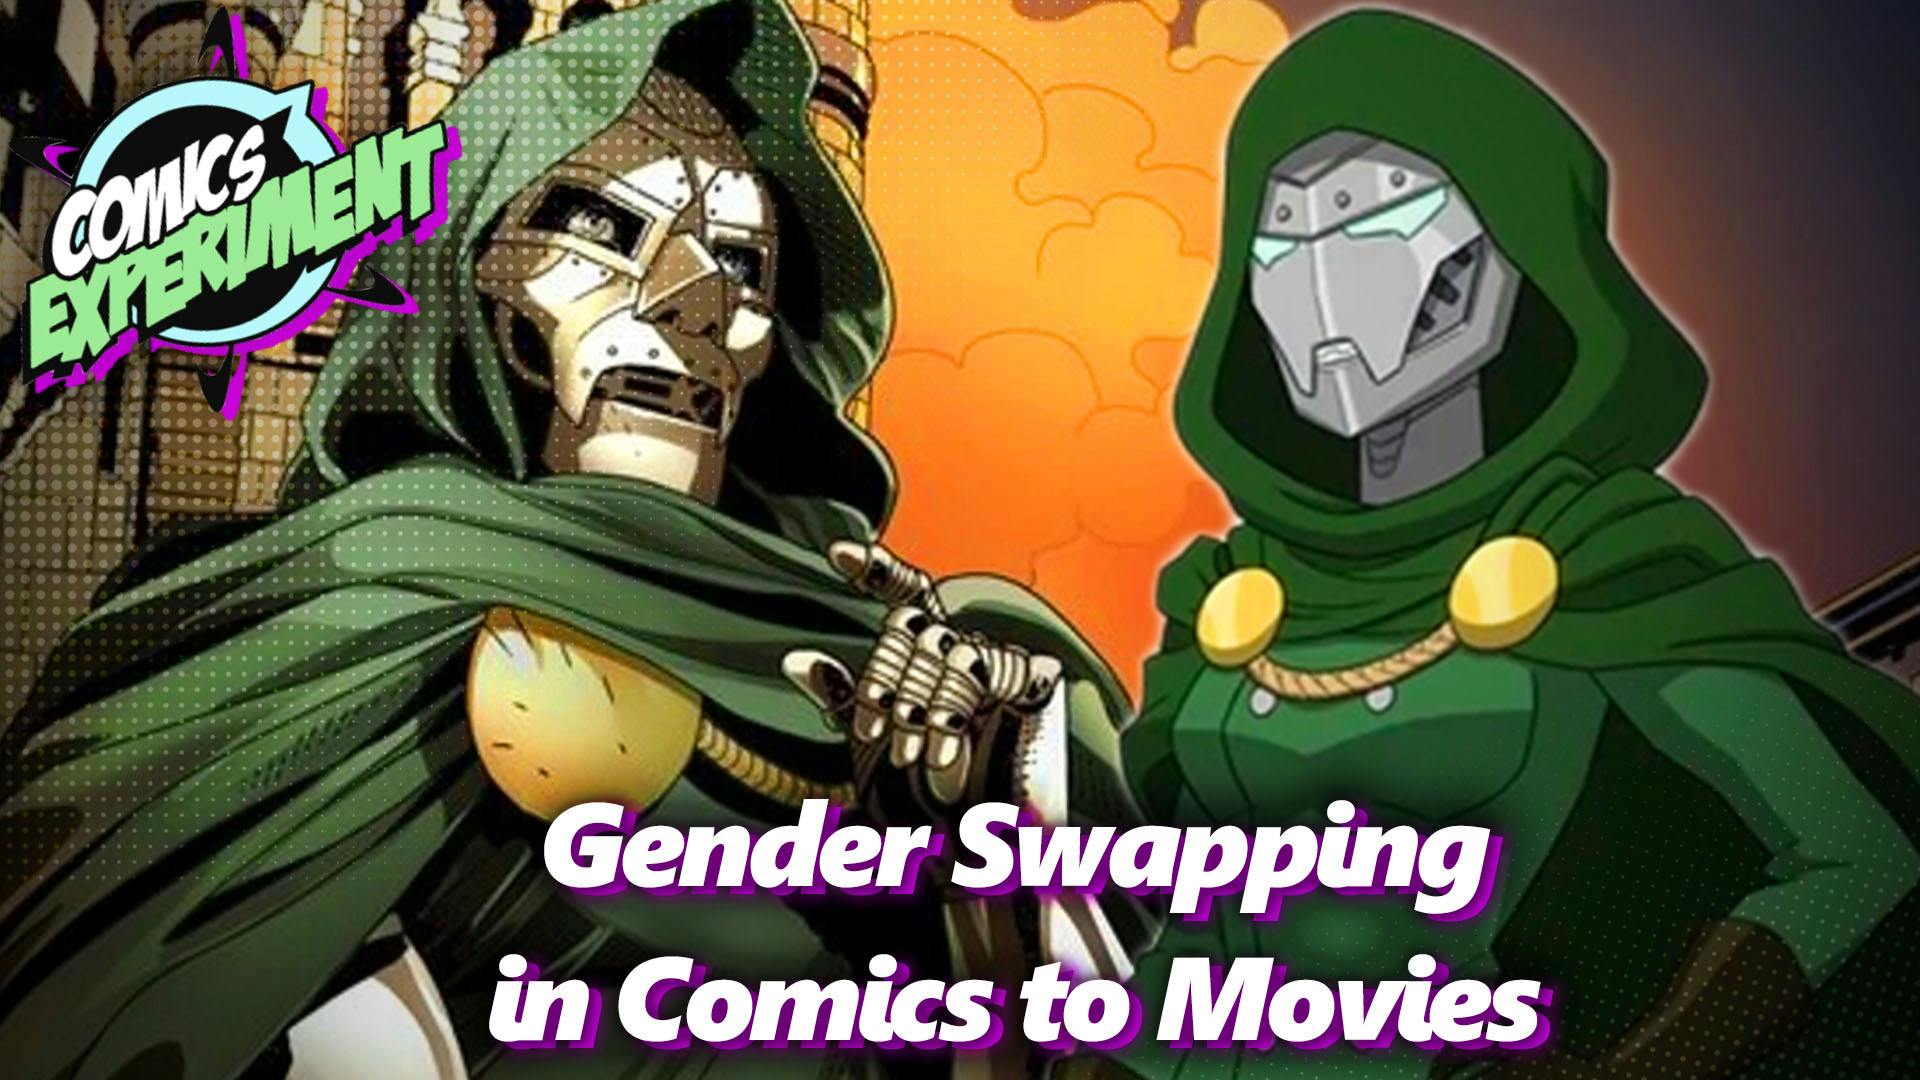 Gender Swapping from Comics to Movies!